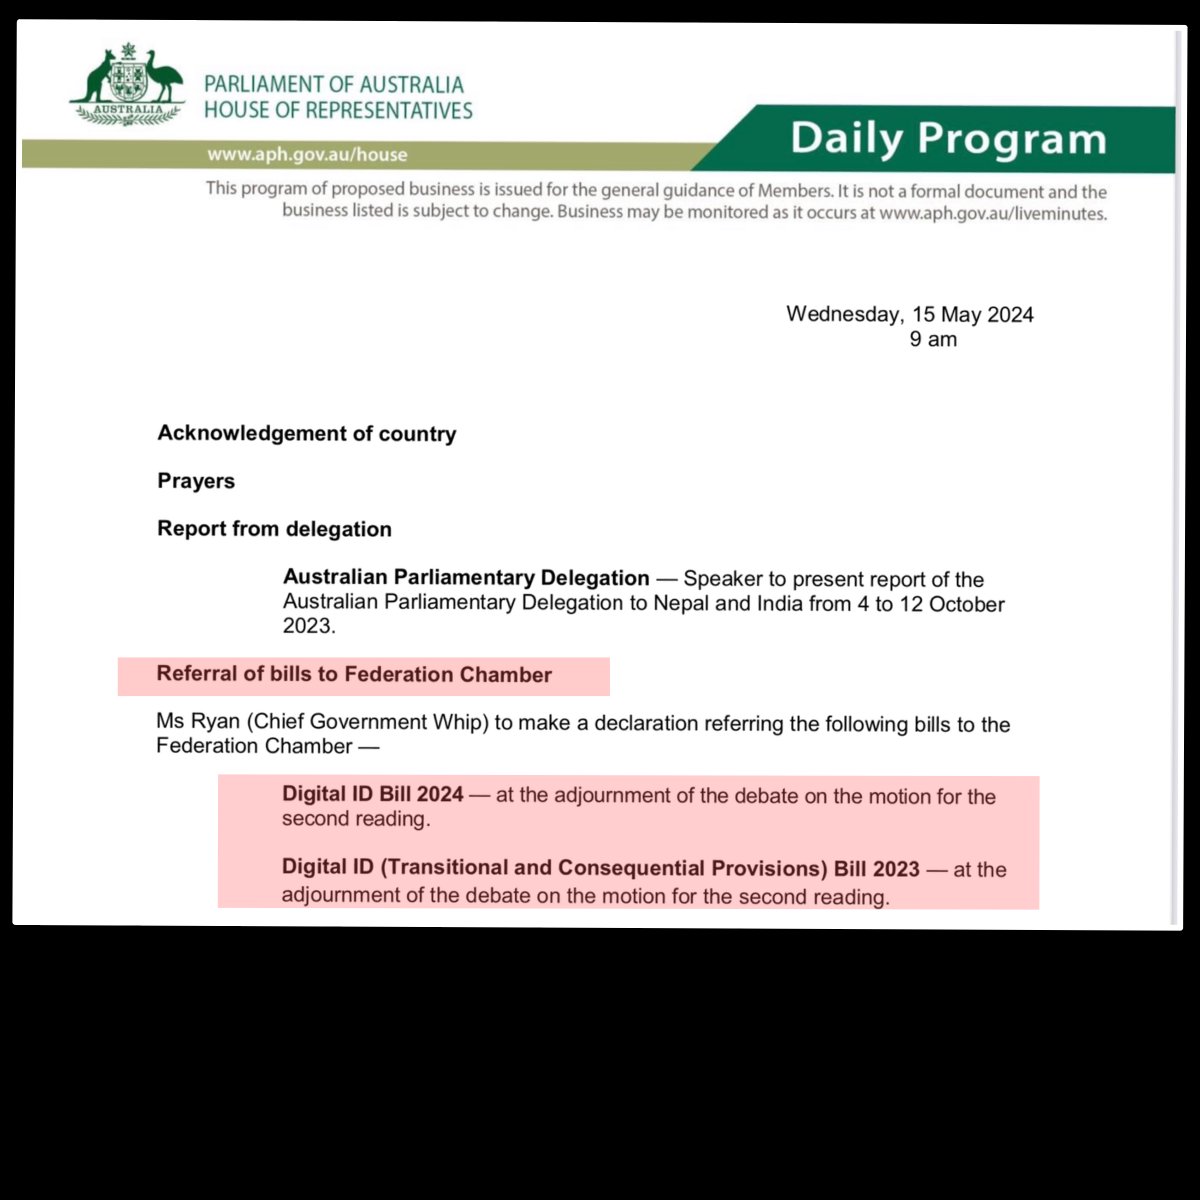 Update on Digital ID Bill After guillotining debate in the Senate, Albanese has now sneakily transferred debate on the Bill to the Federation Chamber. The Federation Chamber is a smaller secondary room, that is used in addition in the main House of Representatives. It is